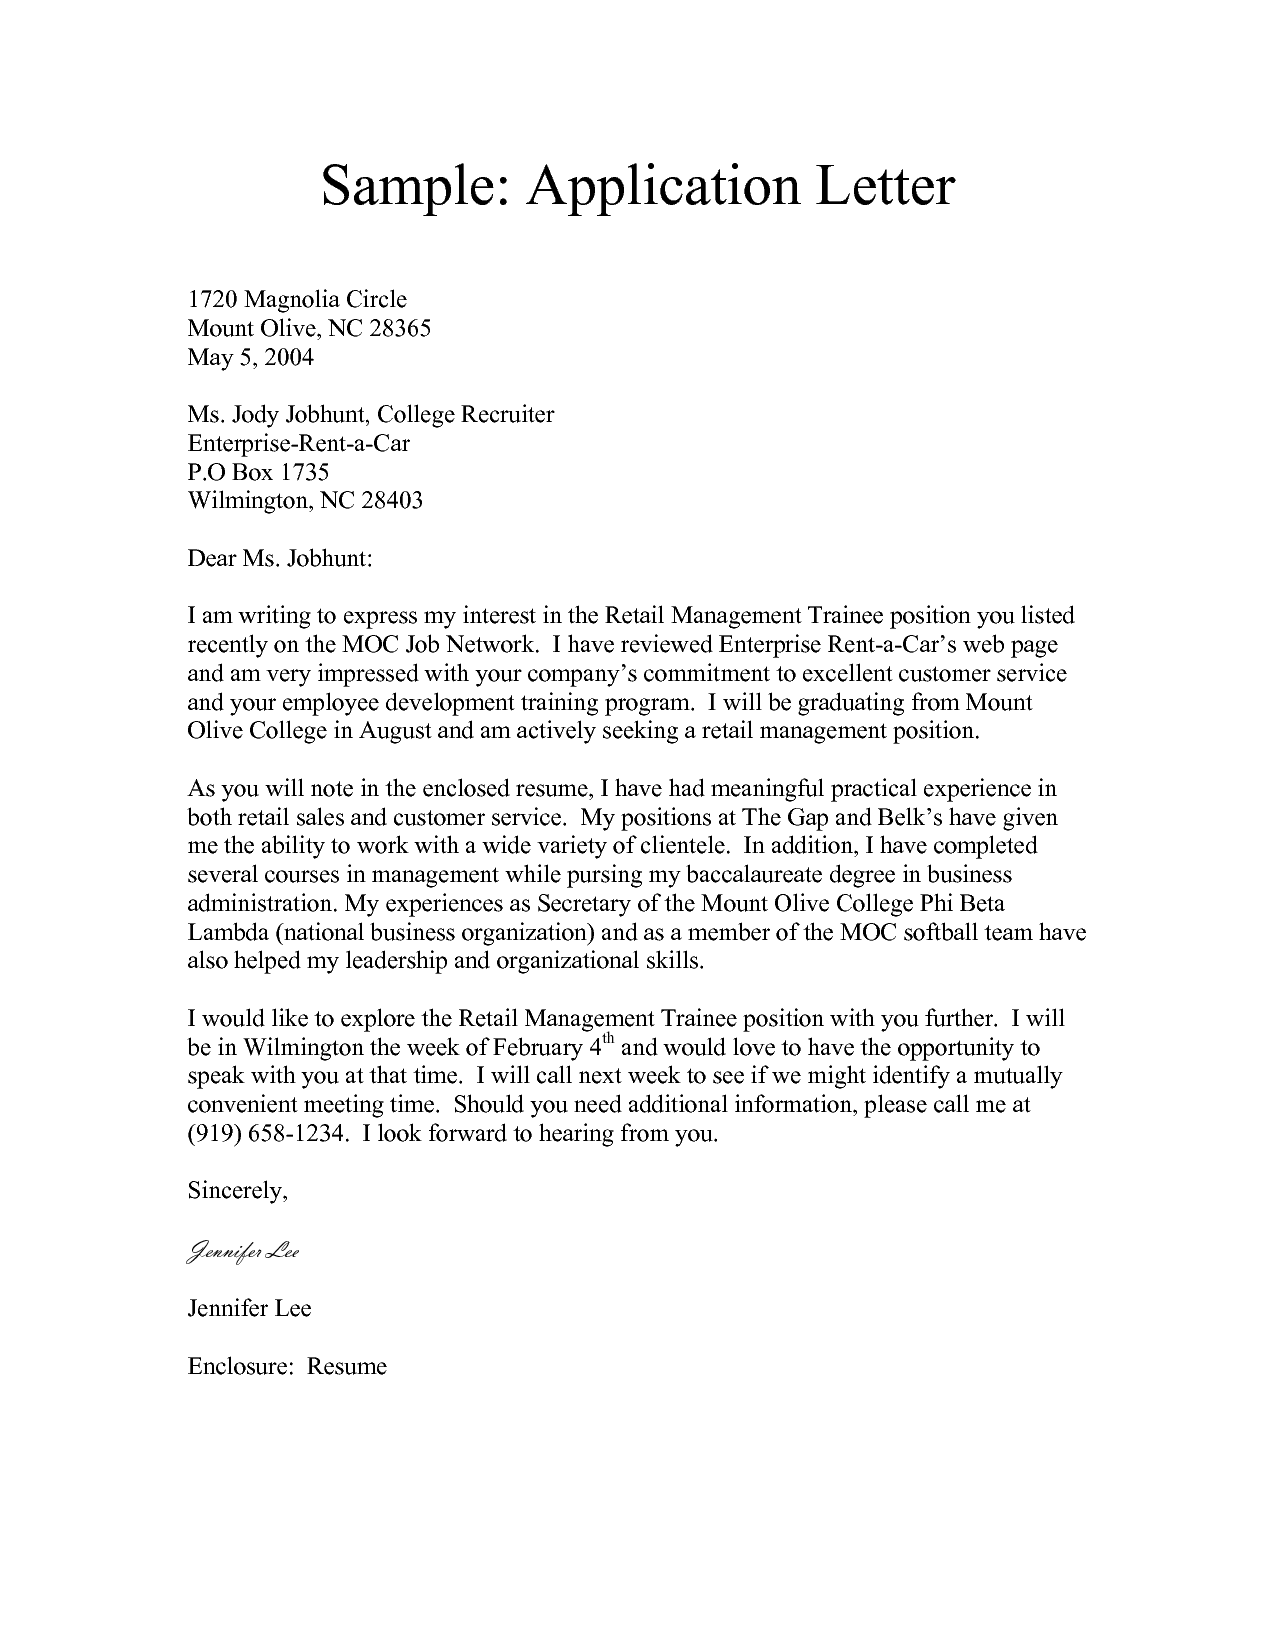 application letter vocabulary